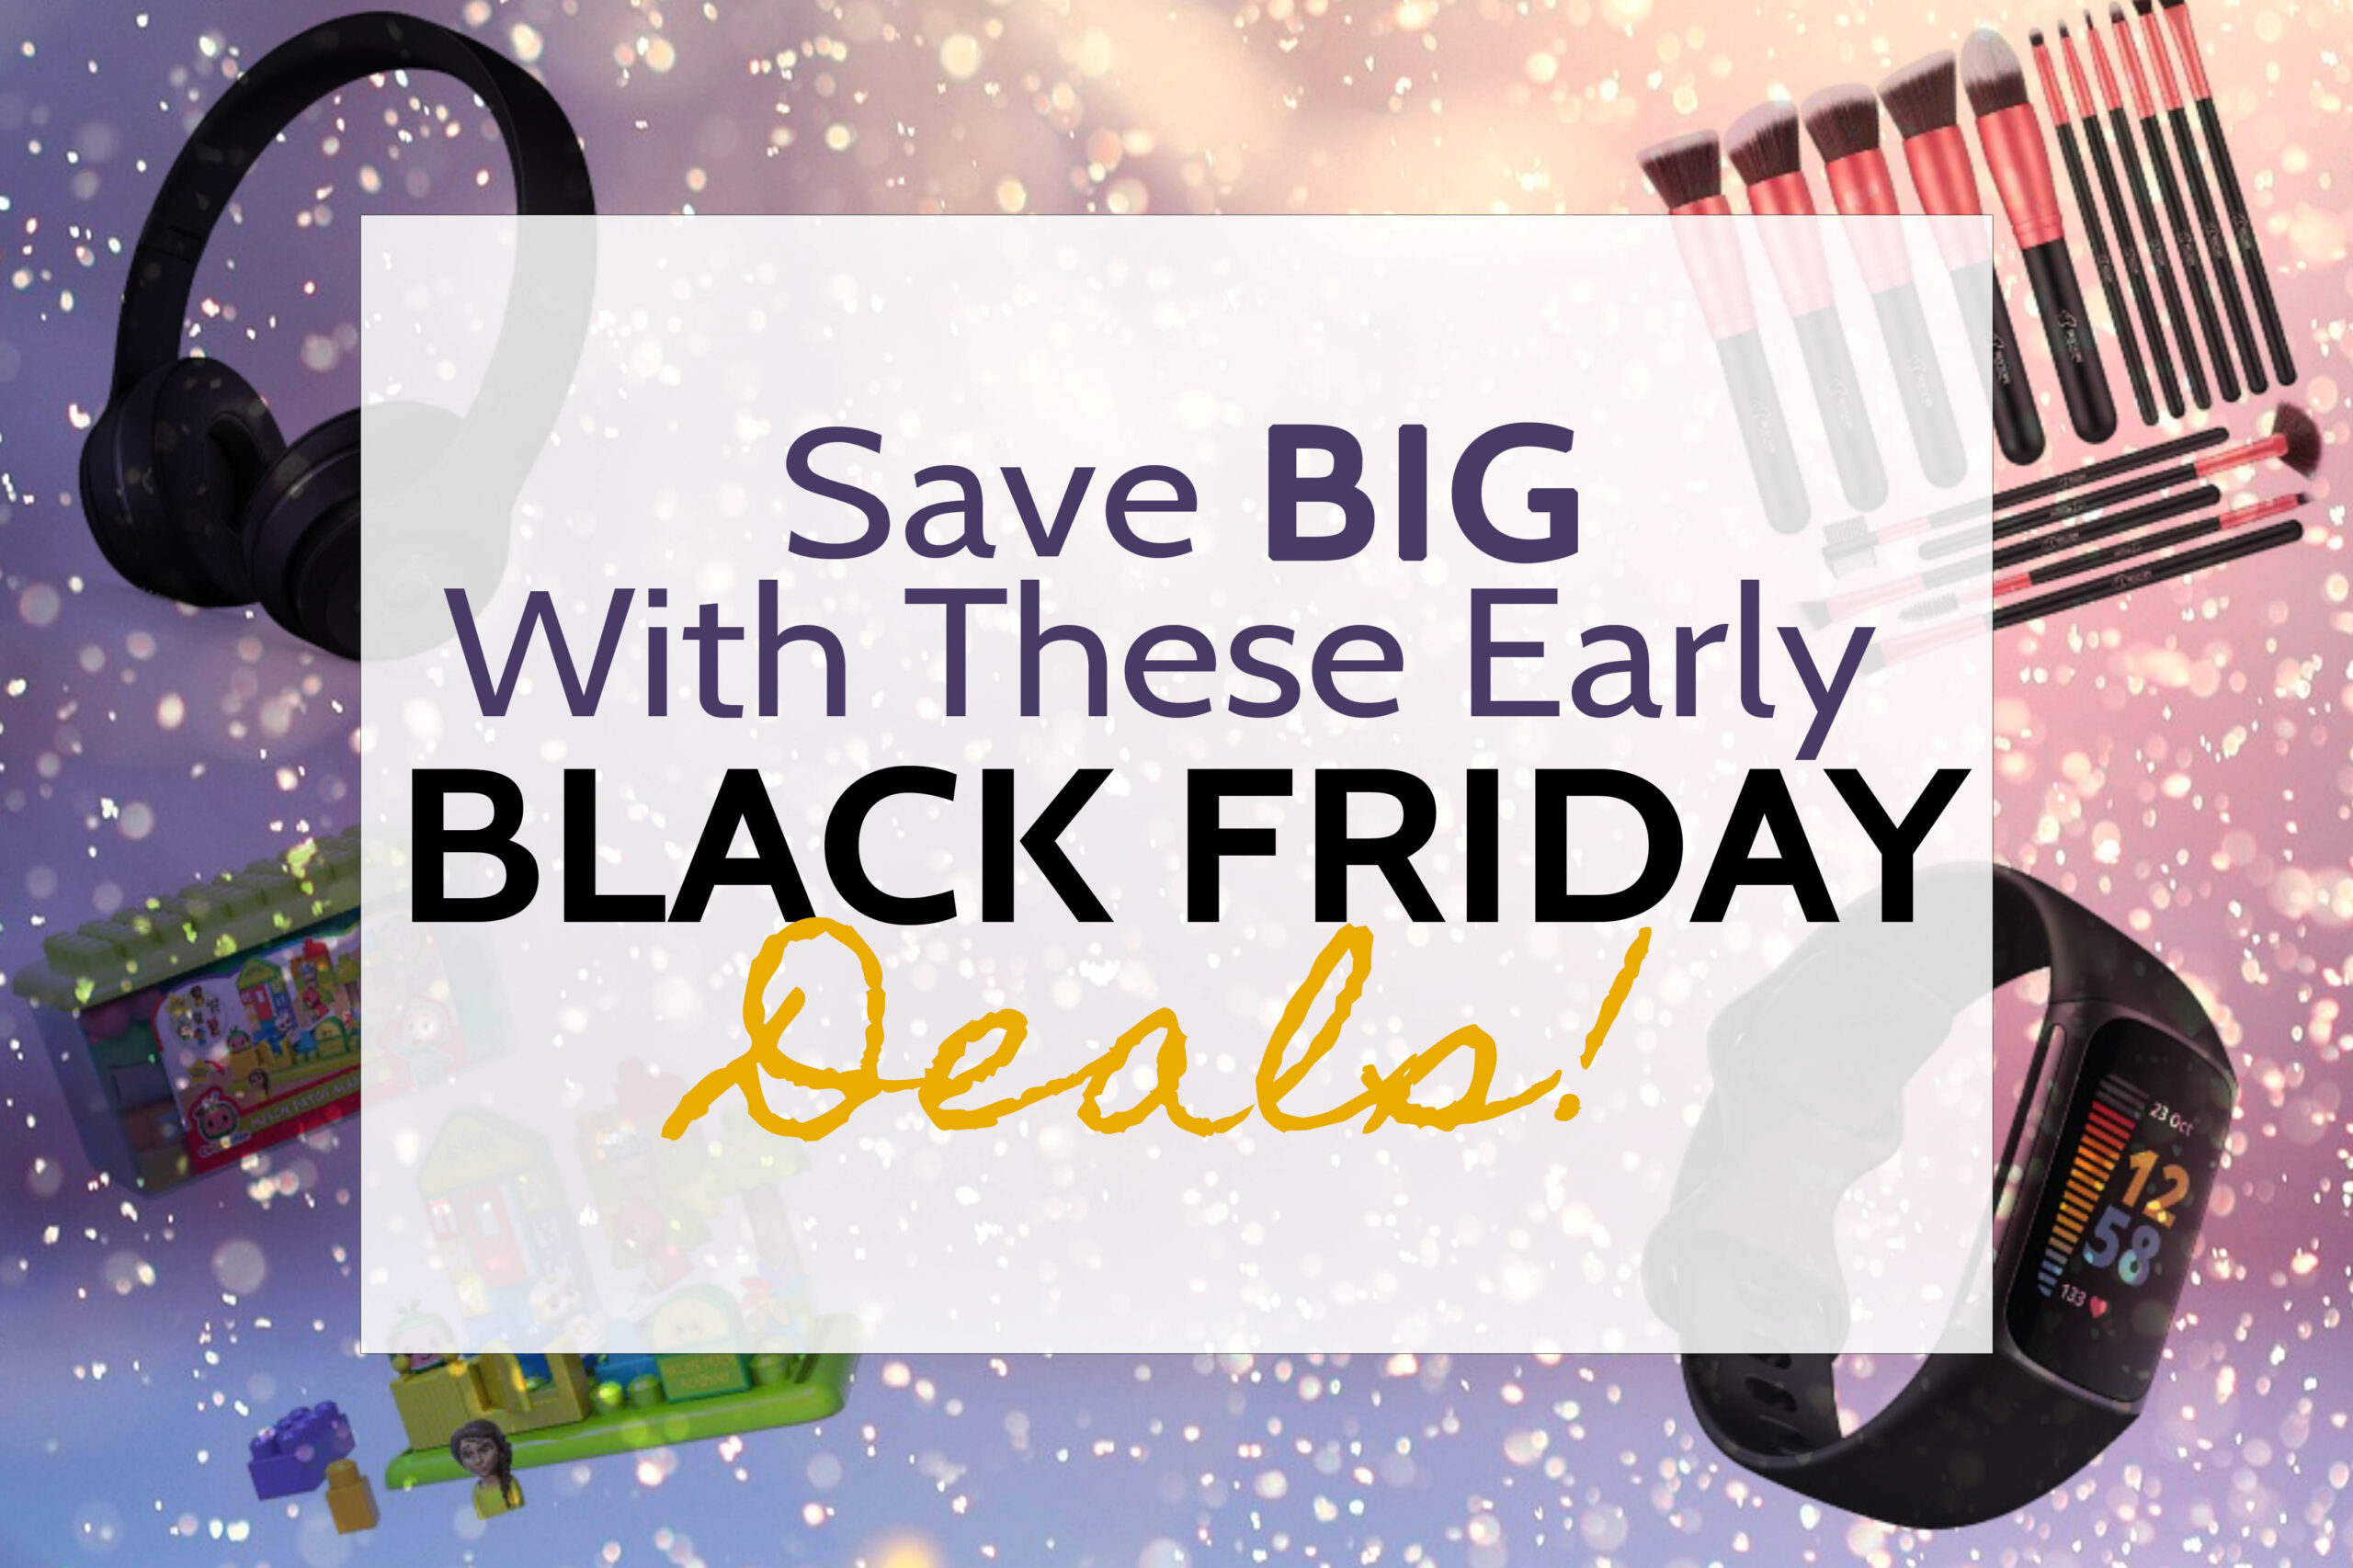 Save BIG With These Early Black Friday Deals